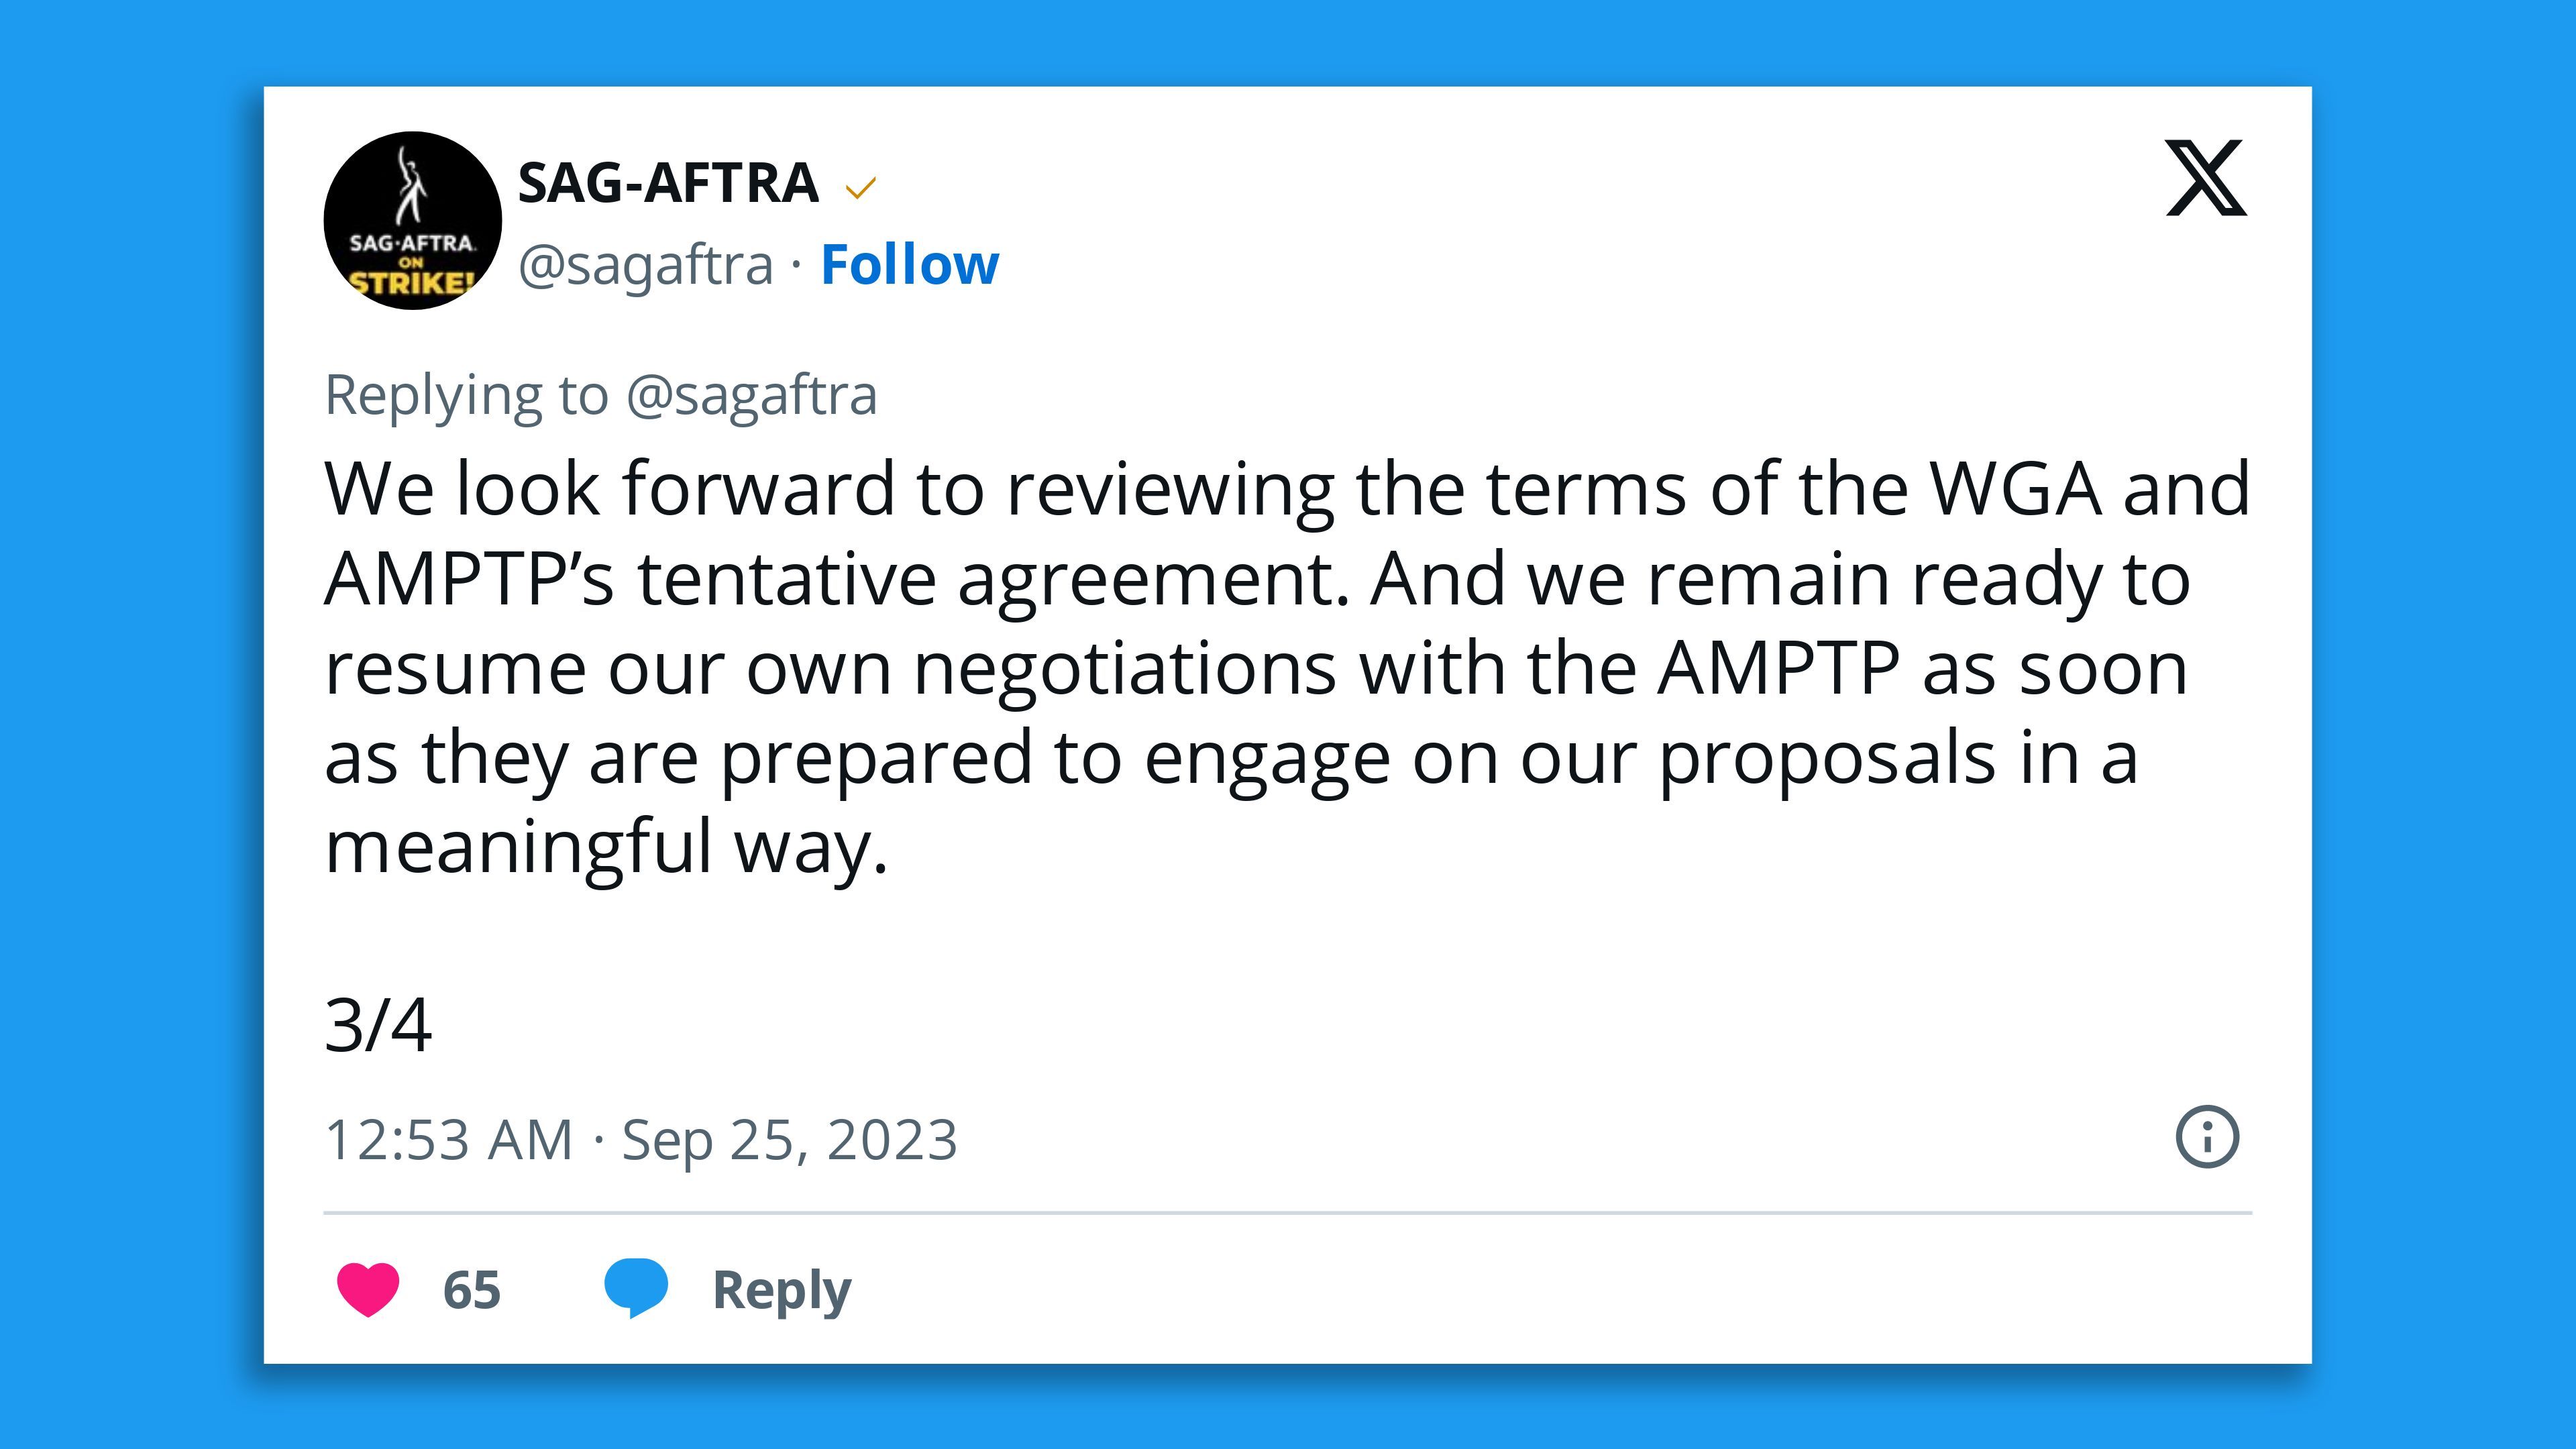 A screenshot of a SAG-AFTRA tweet, saying: "We look forward to reviewing the terms of the WGA and AMPTP’s tentative agreement. And we remain ready to resume our own negotiations with the AMPTP as soon as they are prepared to engage on our proposals in a meaningful way. "